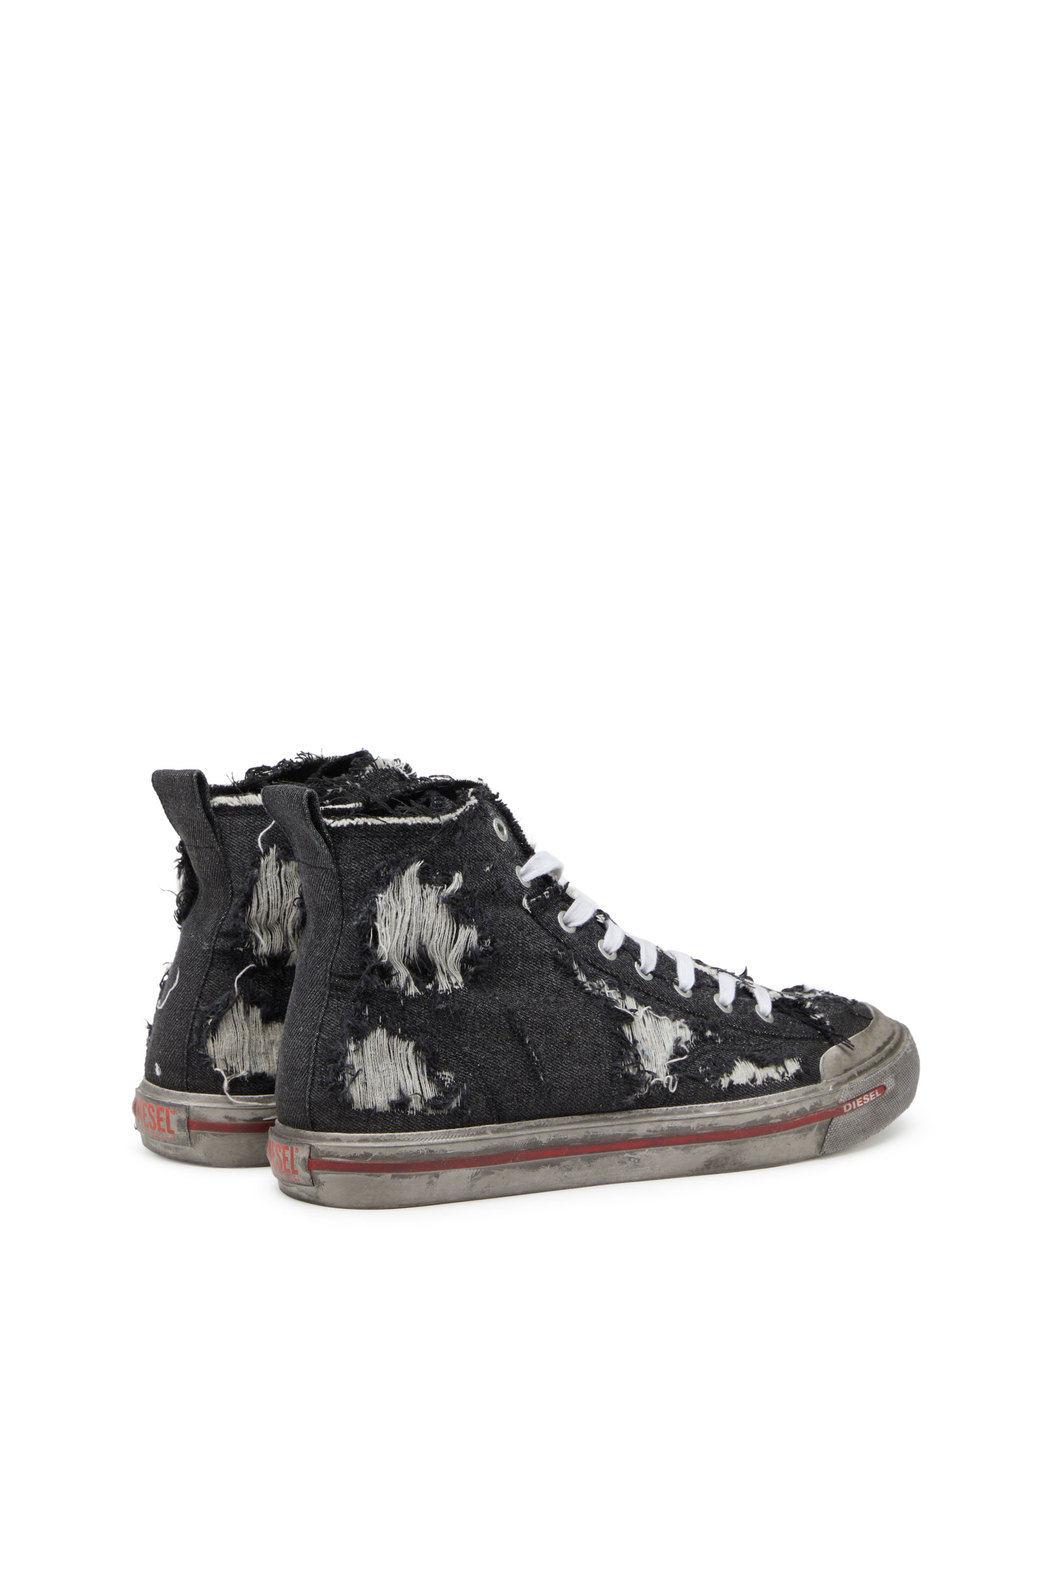 S-Athos Mid - High-top sneakers in frayed denim